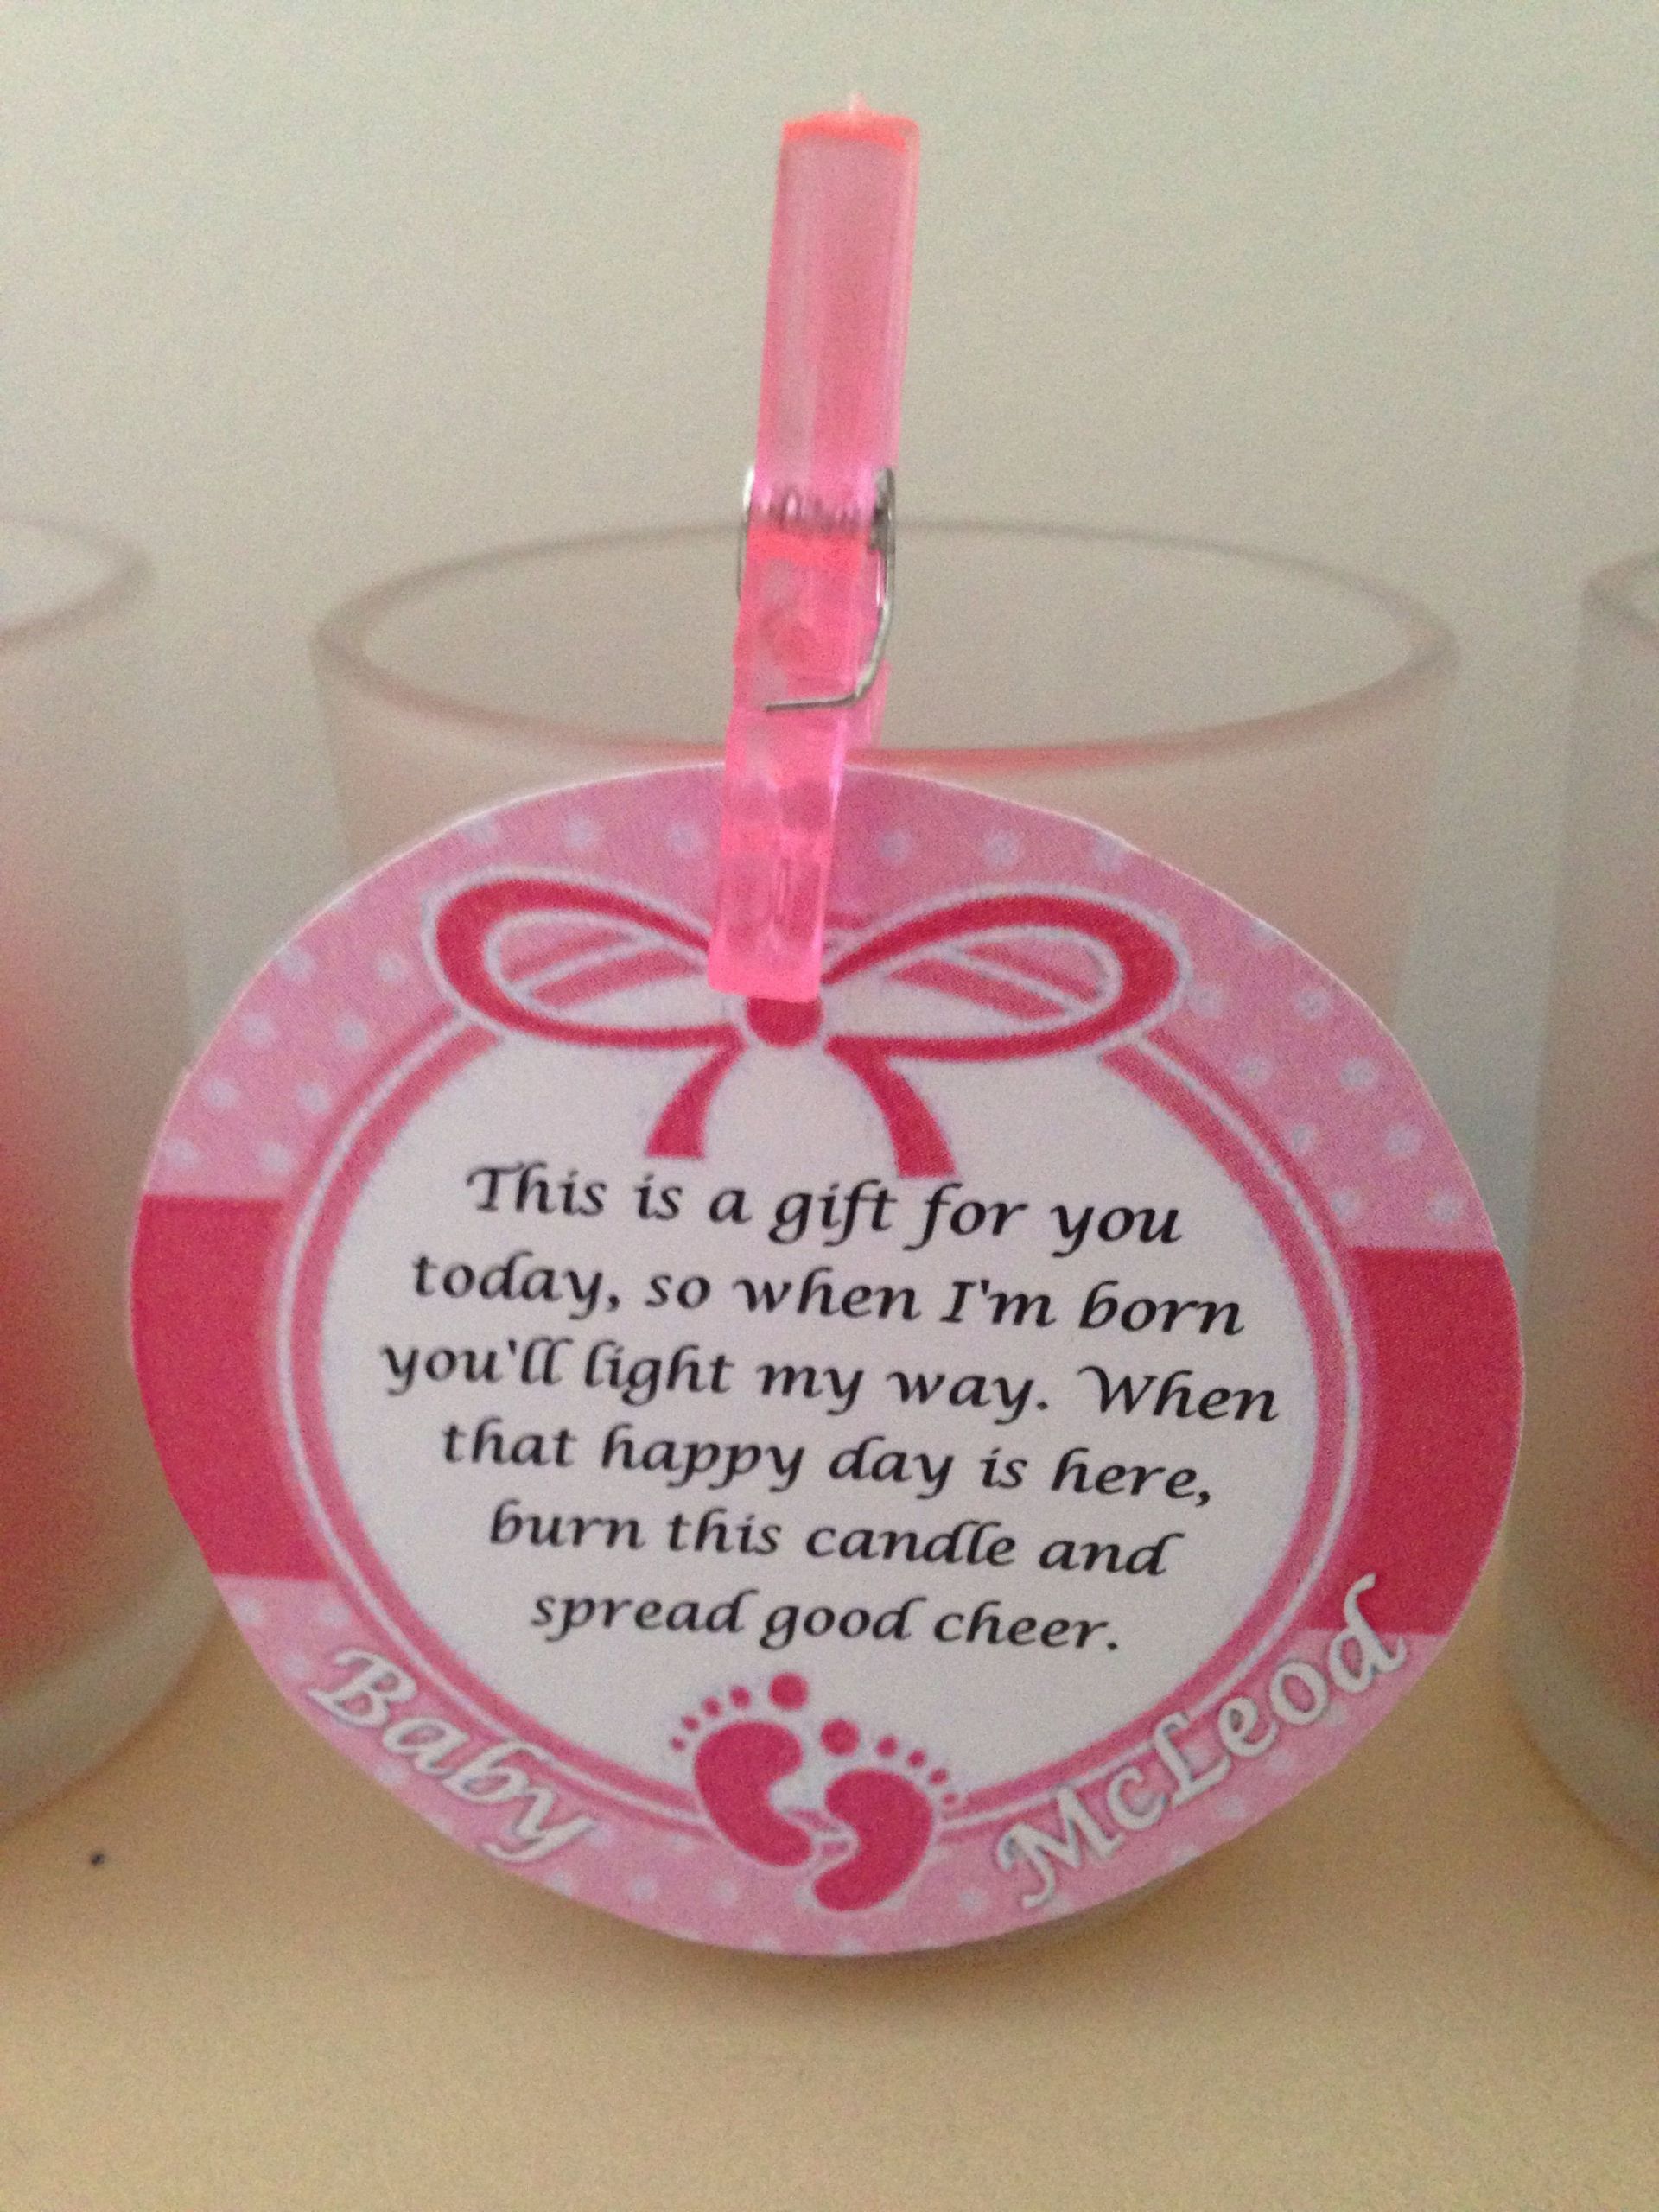 Thank You Gifts For A Baby Shower
 The 30 Best Ideas for Thank You Gift Ideas for Baby Shower